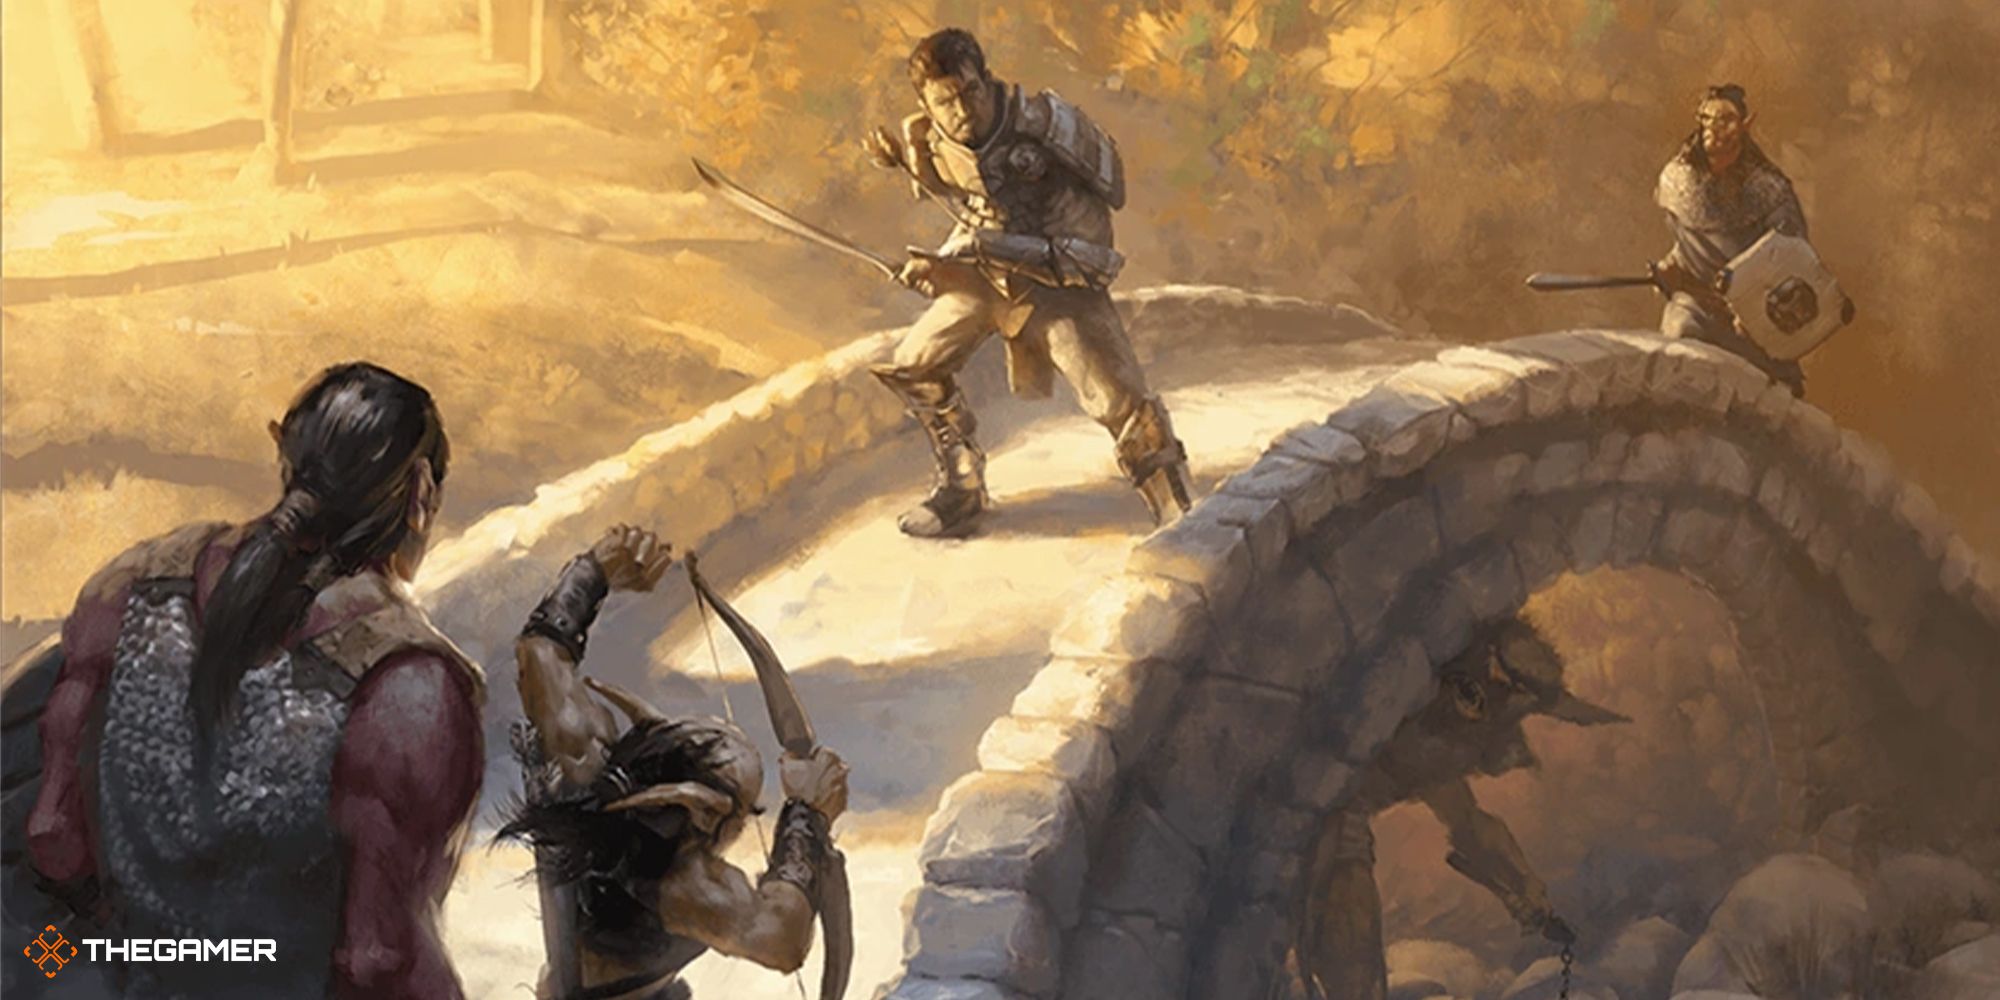 The Best Tips For DMs To Extend Short Campaigns In DnD